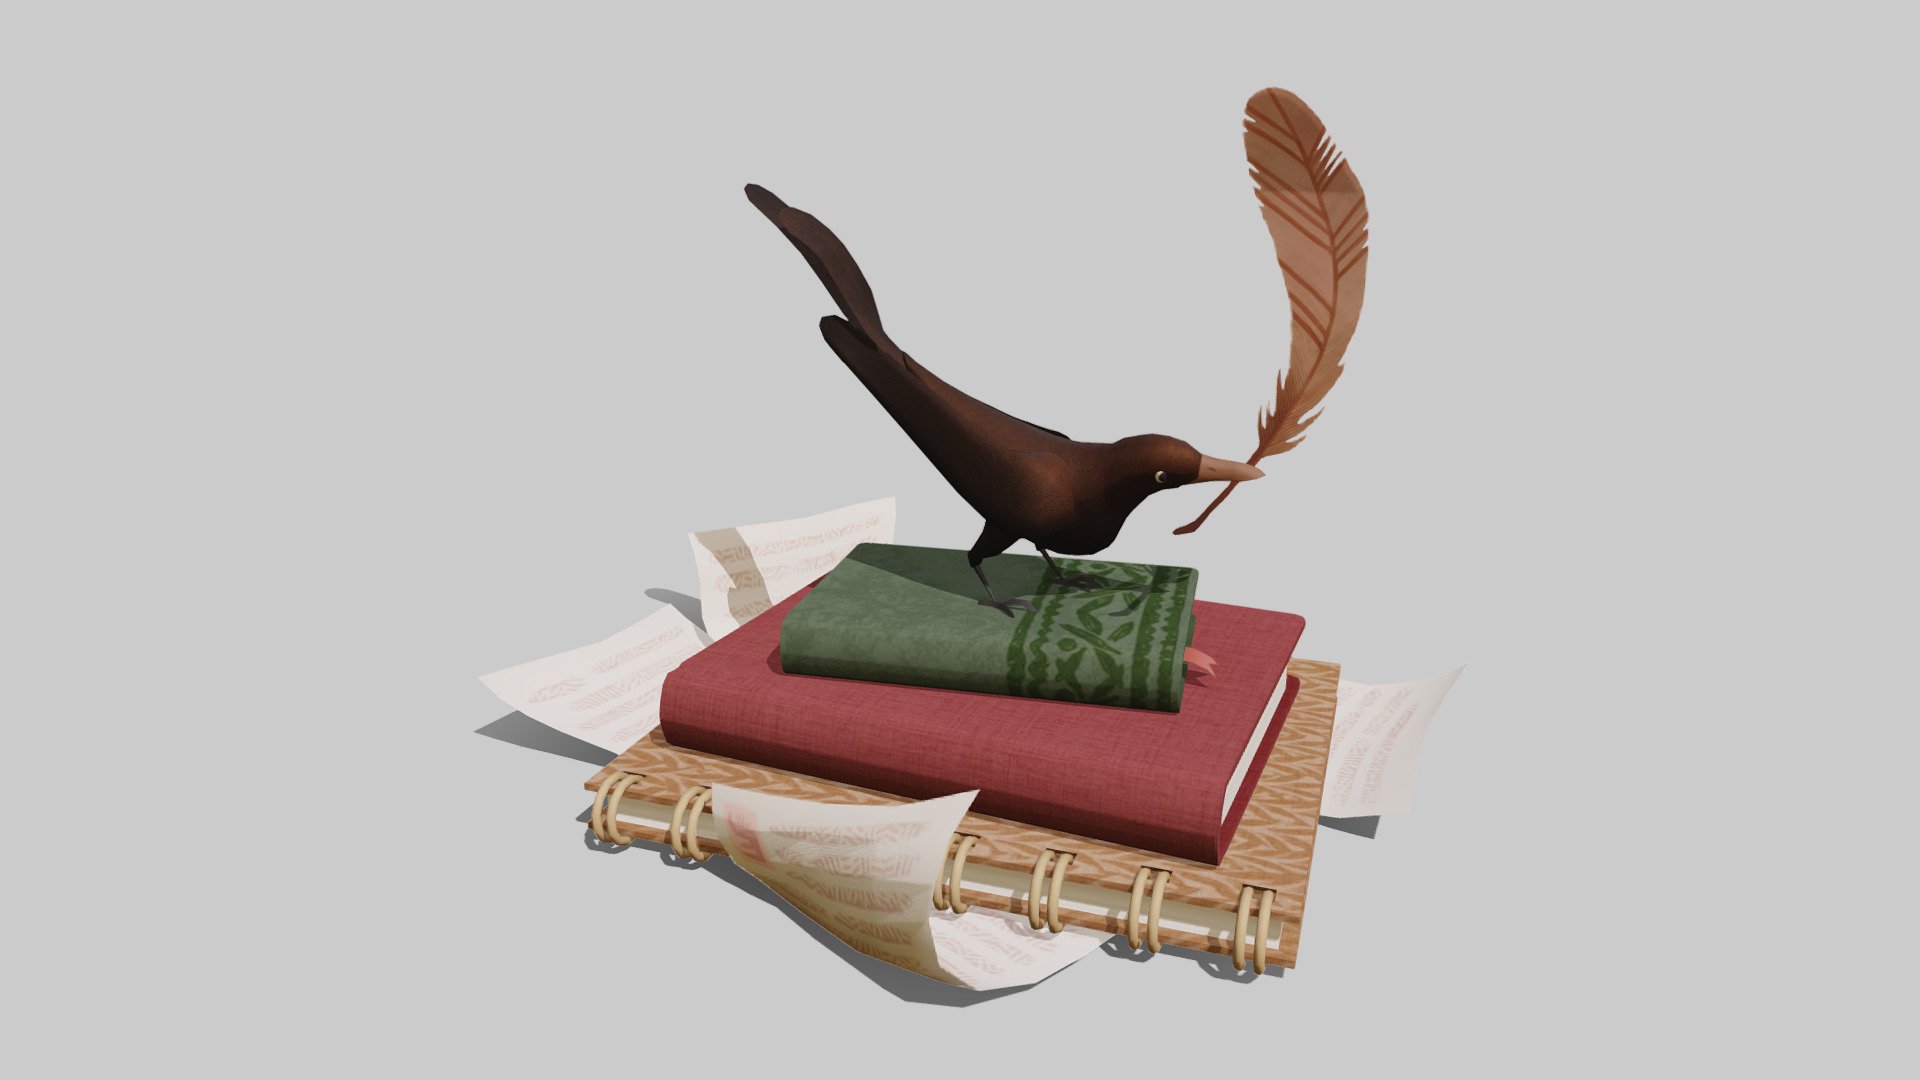 There's a bird on my books!